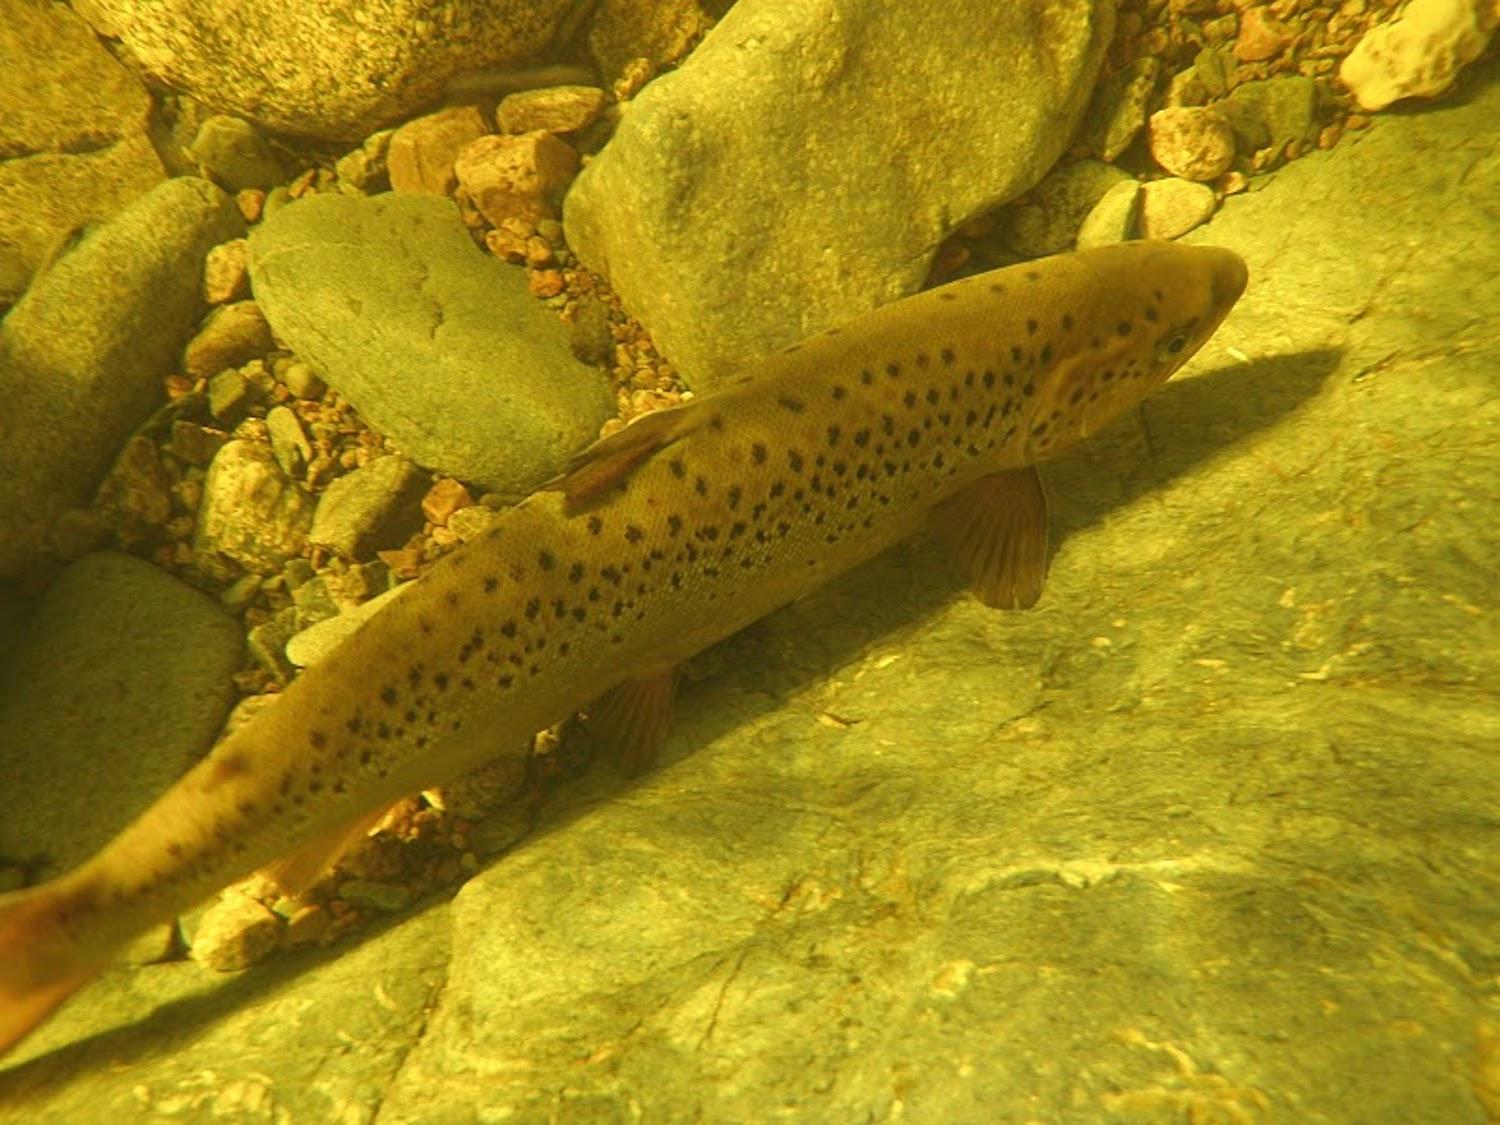 An Atlantic salmon is shown underwater in Fundy National Park.